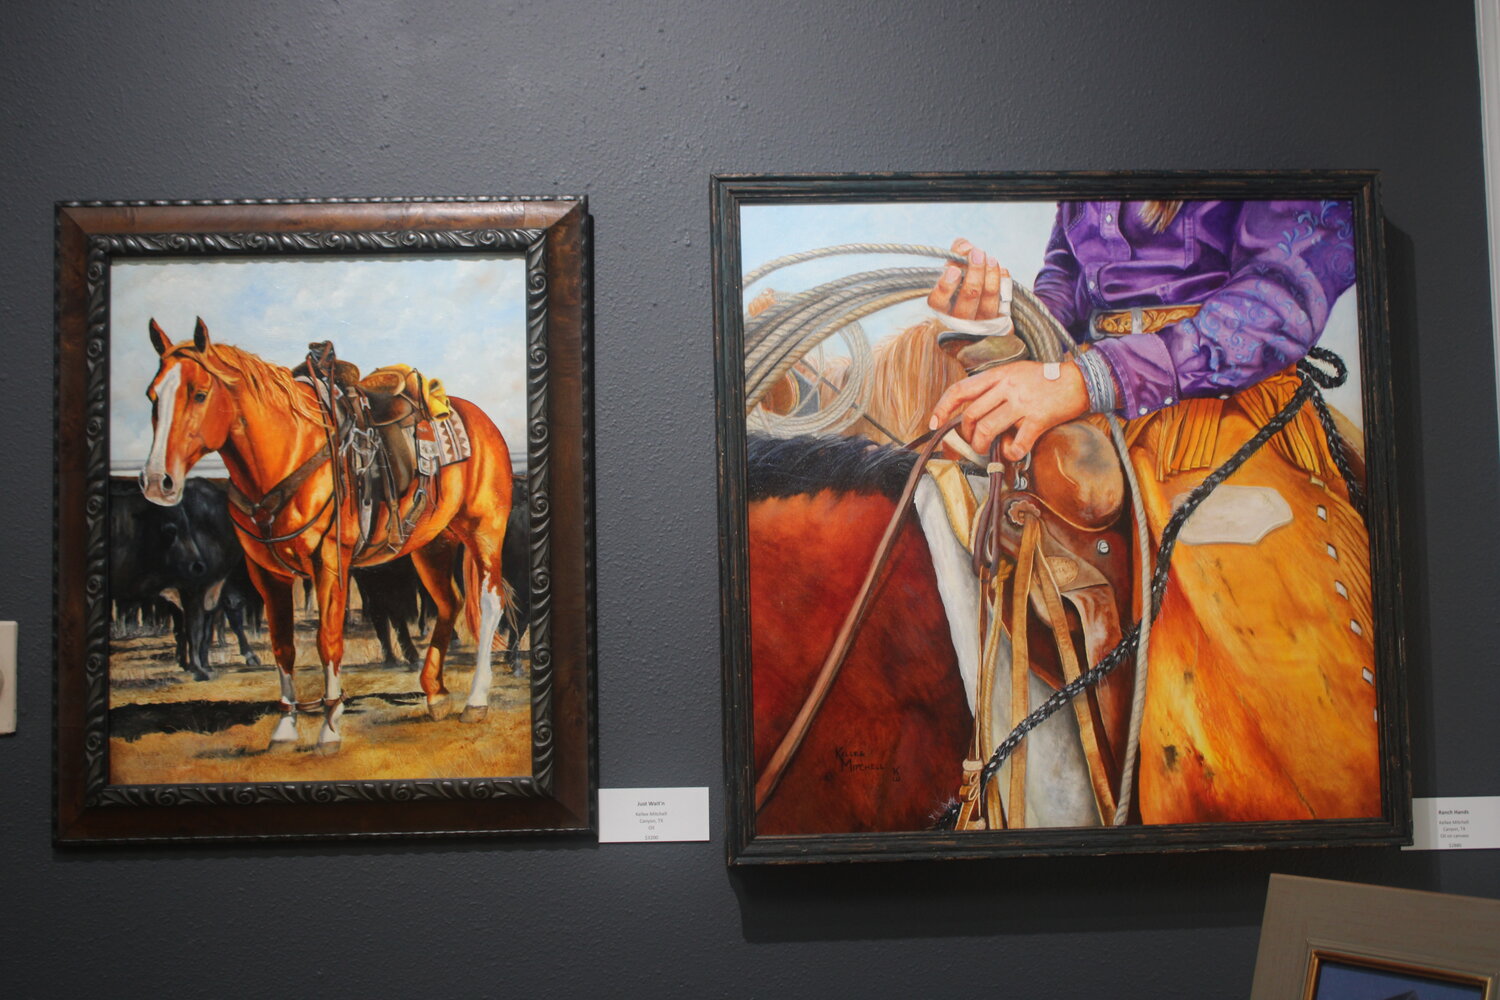 Located at 224 N. Travis St., the Lake Granbury Art Association Juried Fall Art Show at the Shanley House Gallery will feature 58 pieces of artwork in a variety of mediums — paintings, drawings, dimensional, graphics, and mixed media.